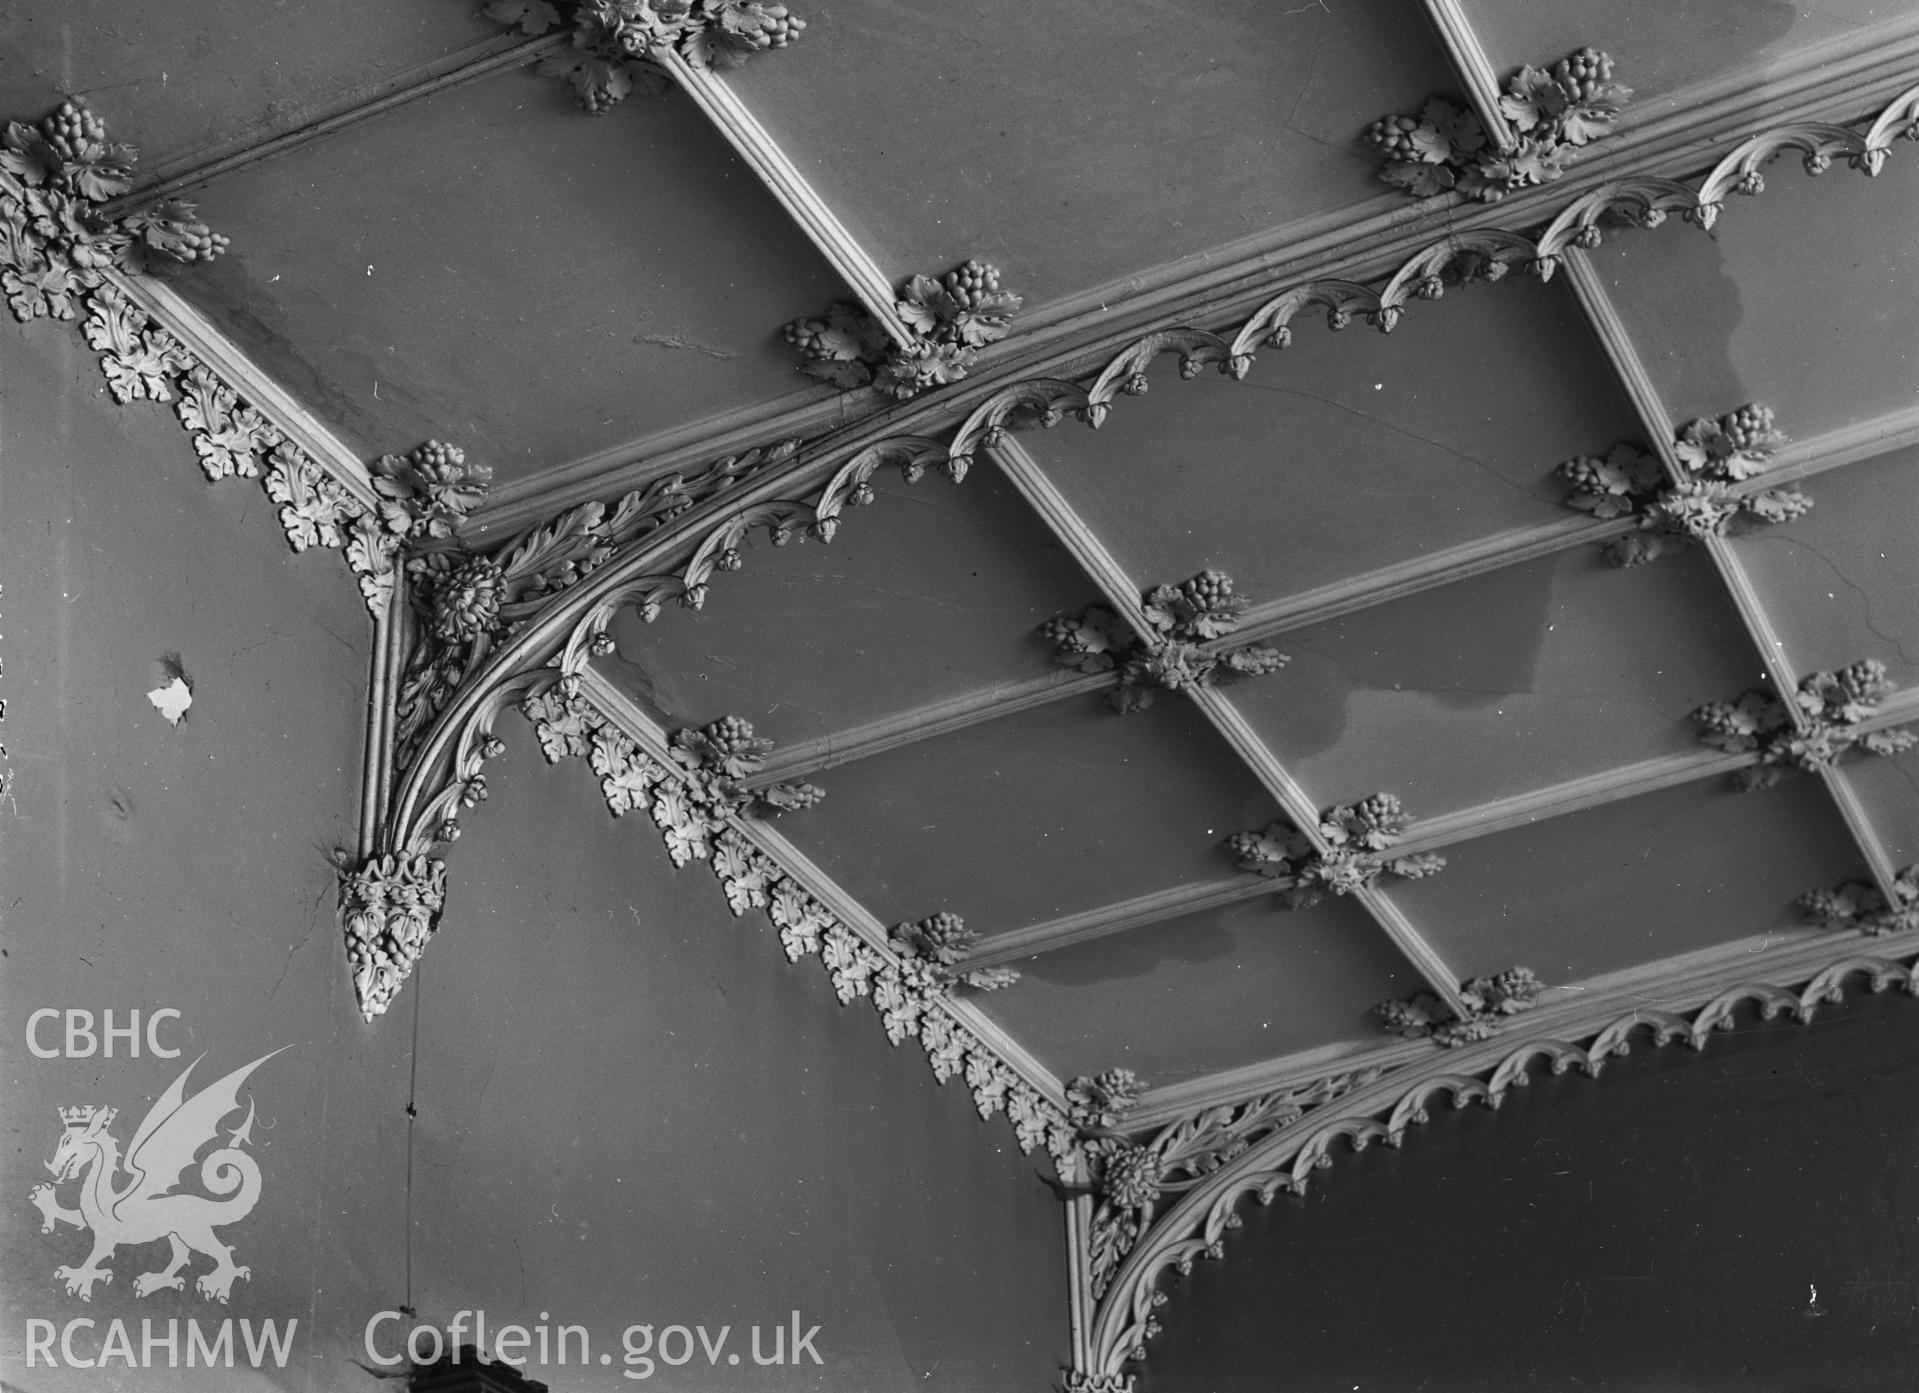 Interior view showing detail of the ceiling in the dining room